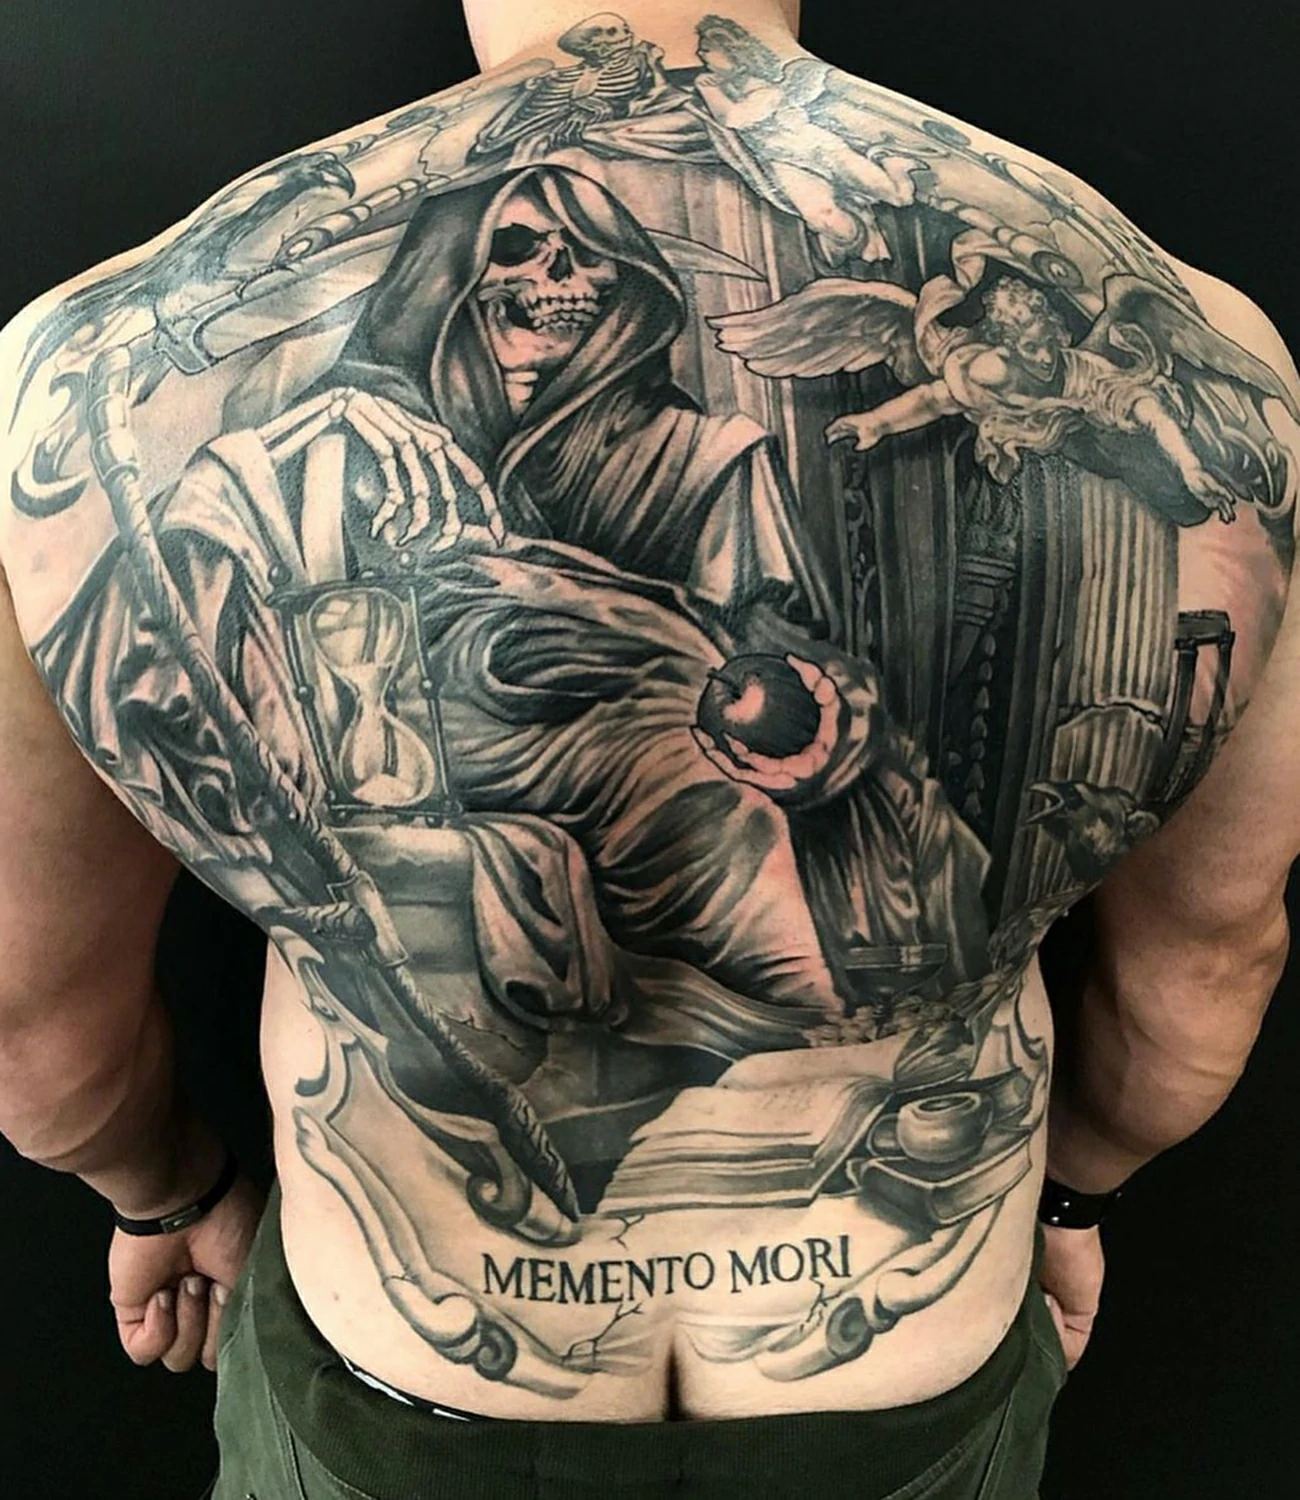 memento mori back tattoo: An extensive "memento mori" tattoo designed for the back, allowing for a larger, more detailed depiction.